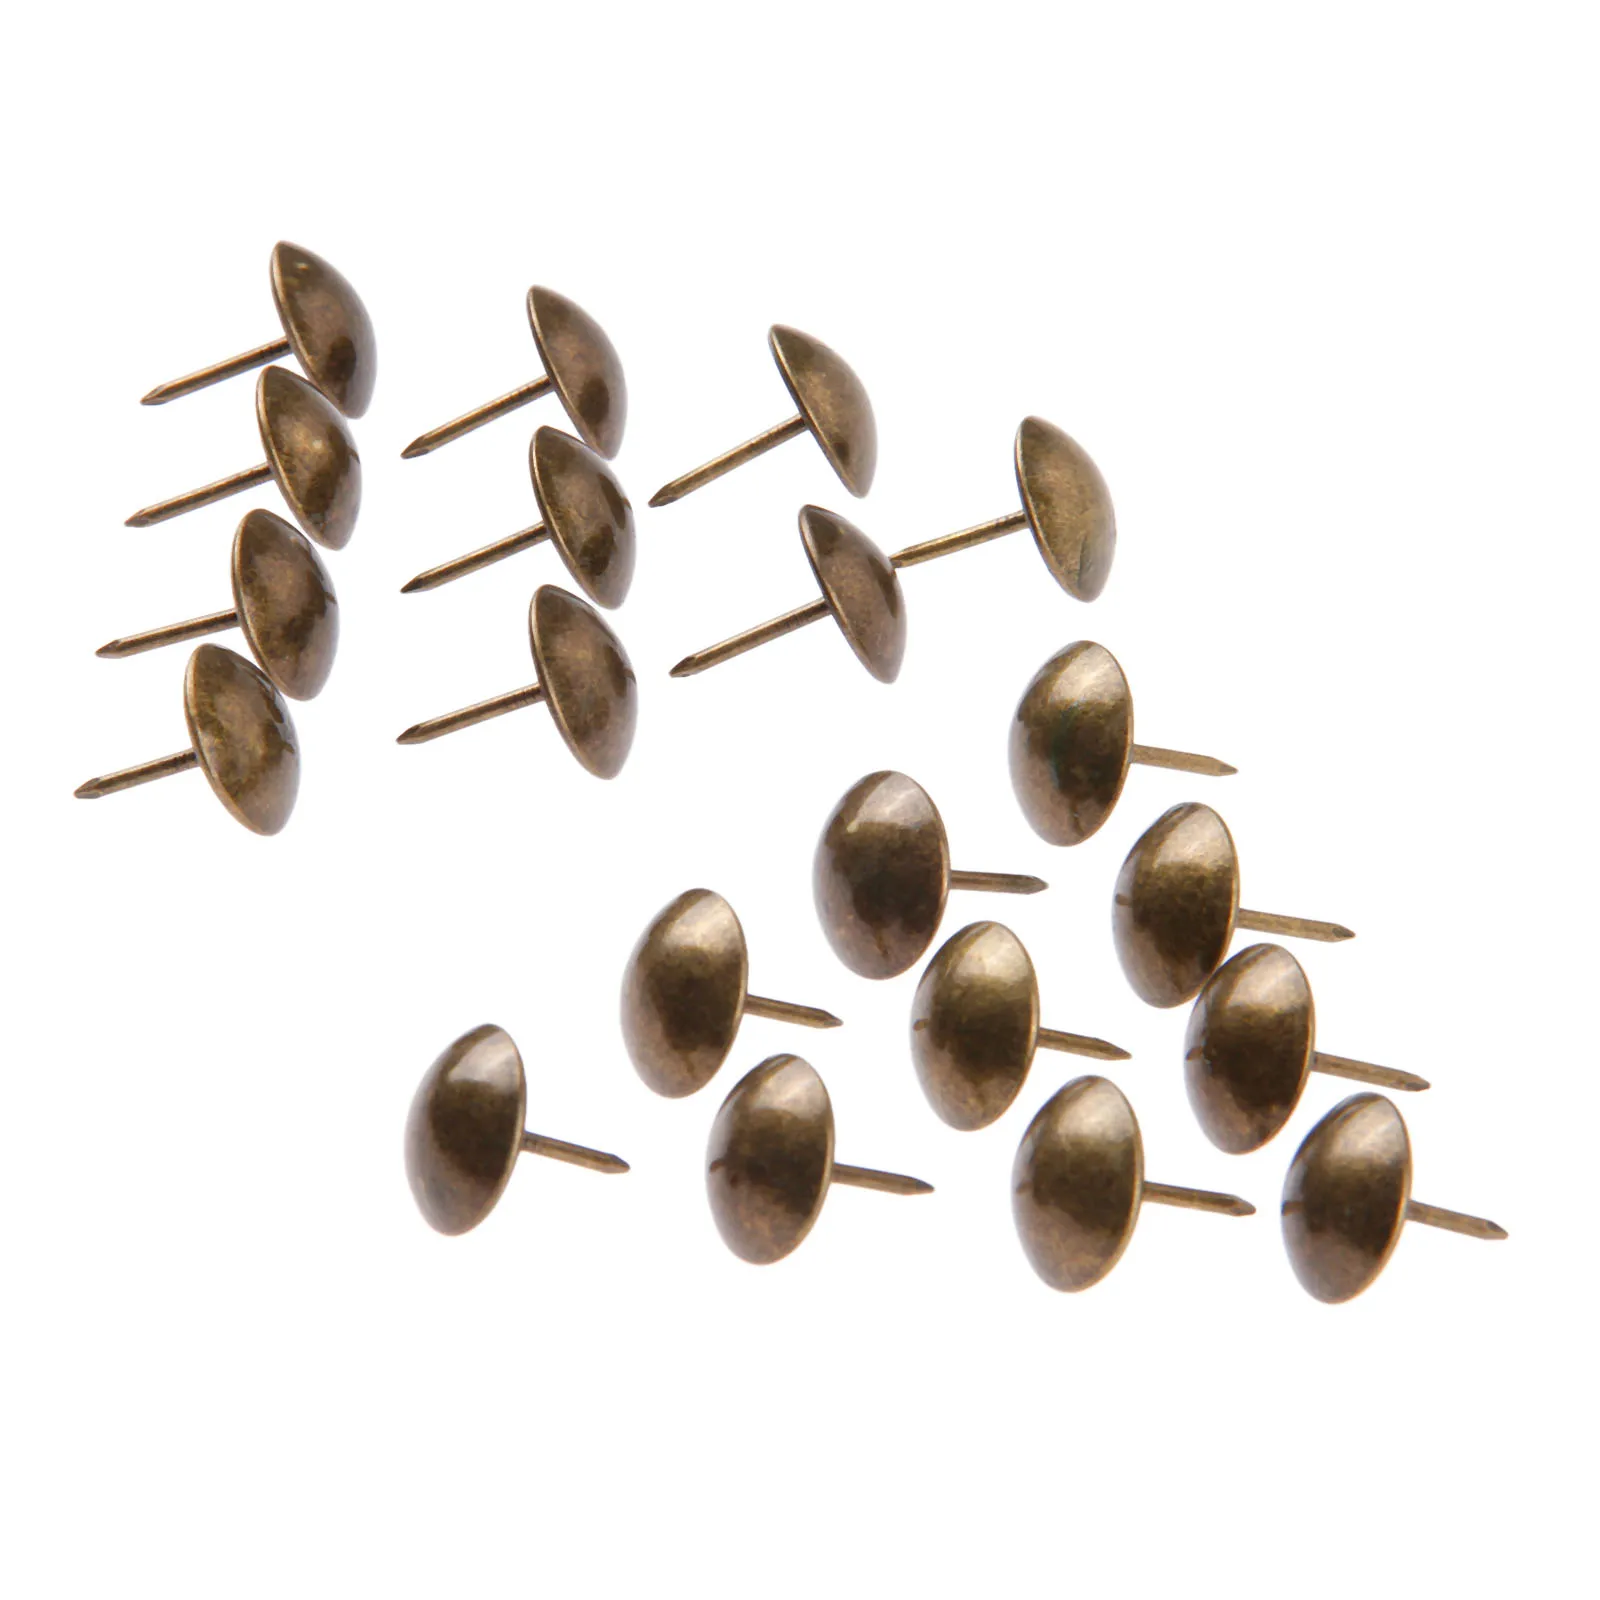 

20pcs Antique Bronze Upholstery Nails Tacks 16*20mm Furniture Nails Pins for Furniture Sofa Headboards